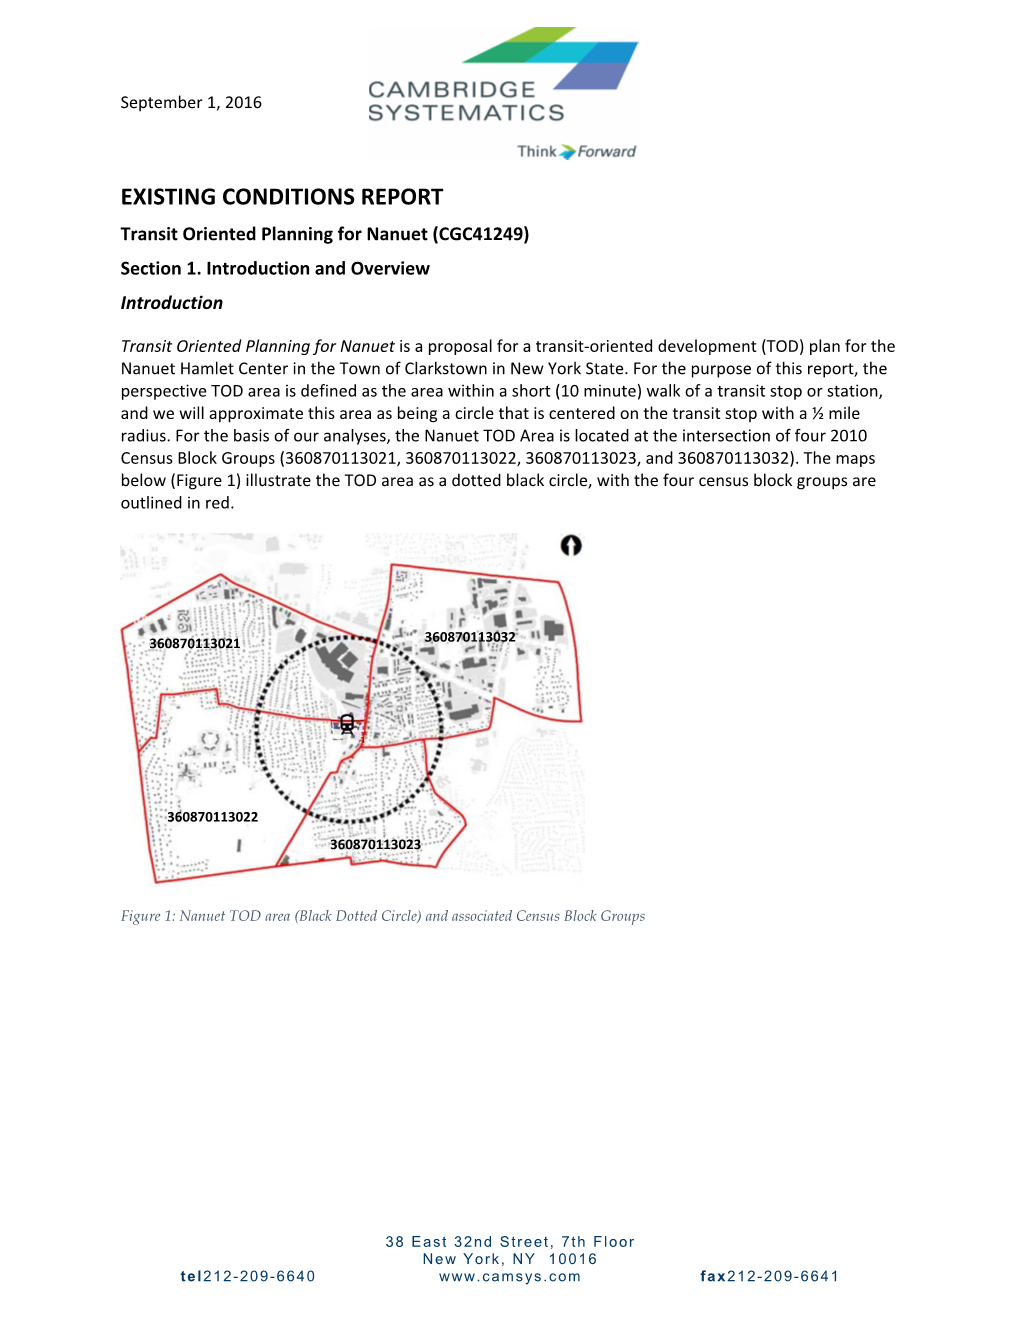 EXISTING CONDITIONS REPORT Transit Oriented Planning for Nanuet (CGC41249) Section 1